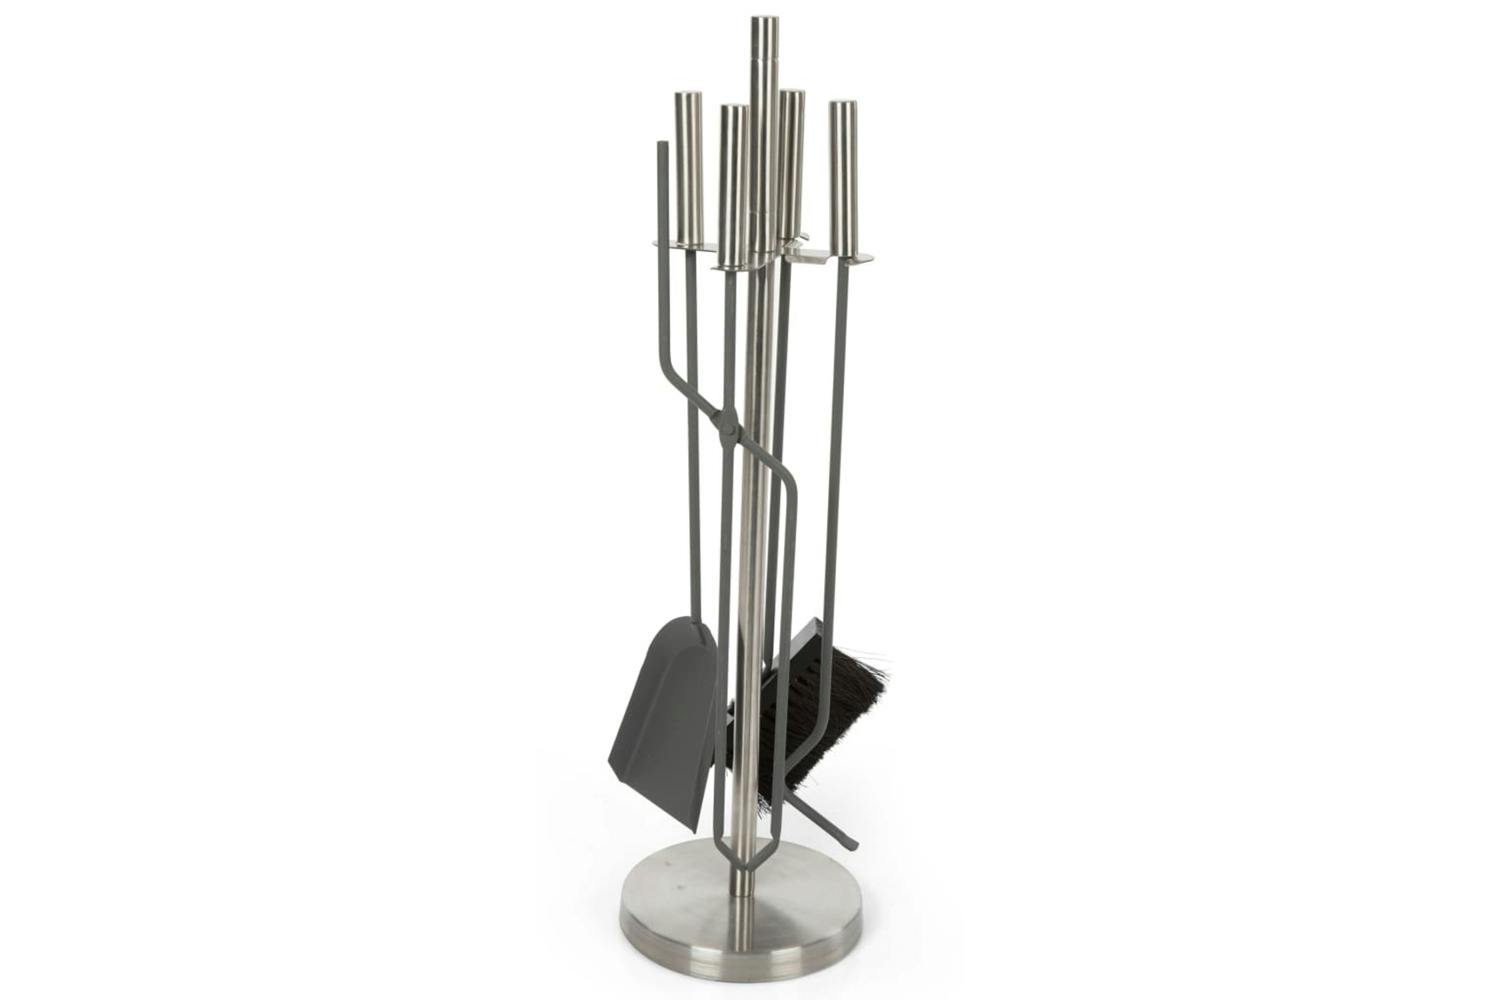 Perel 432477 4 Piece Fireplace Set Stainless Steel